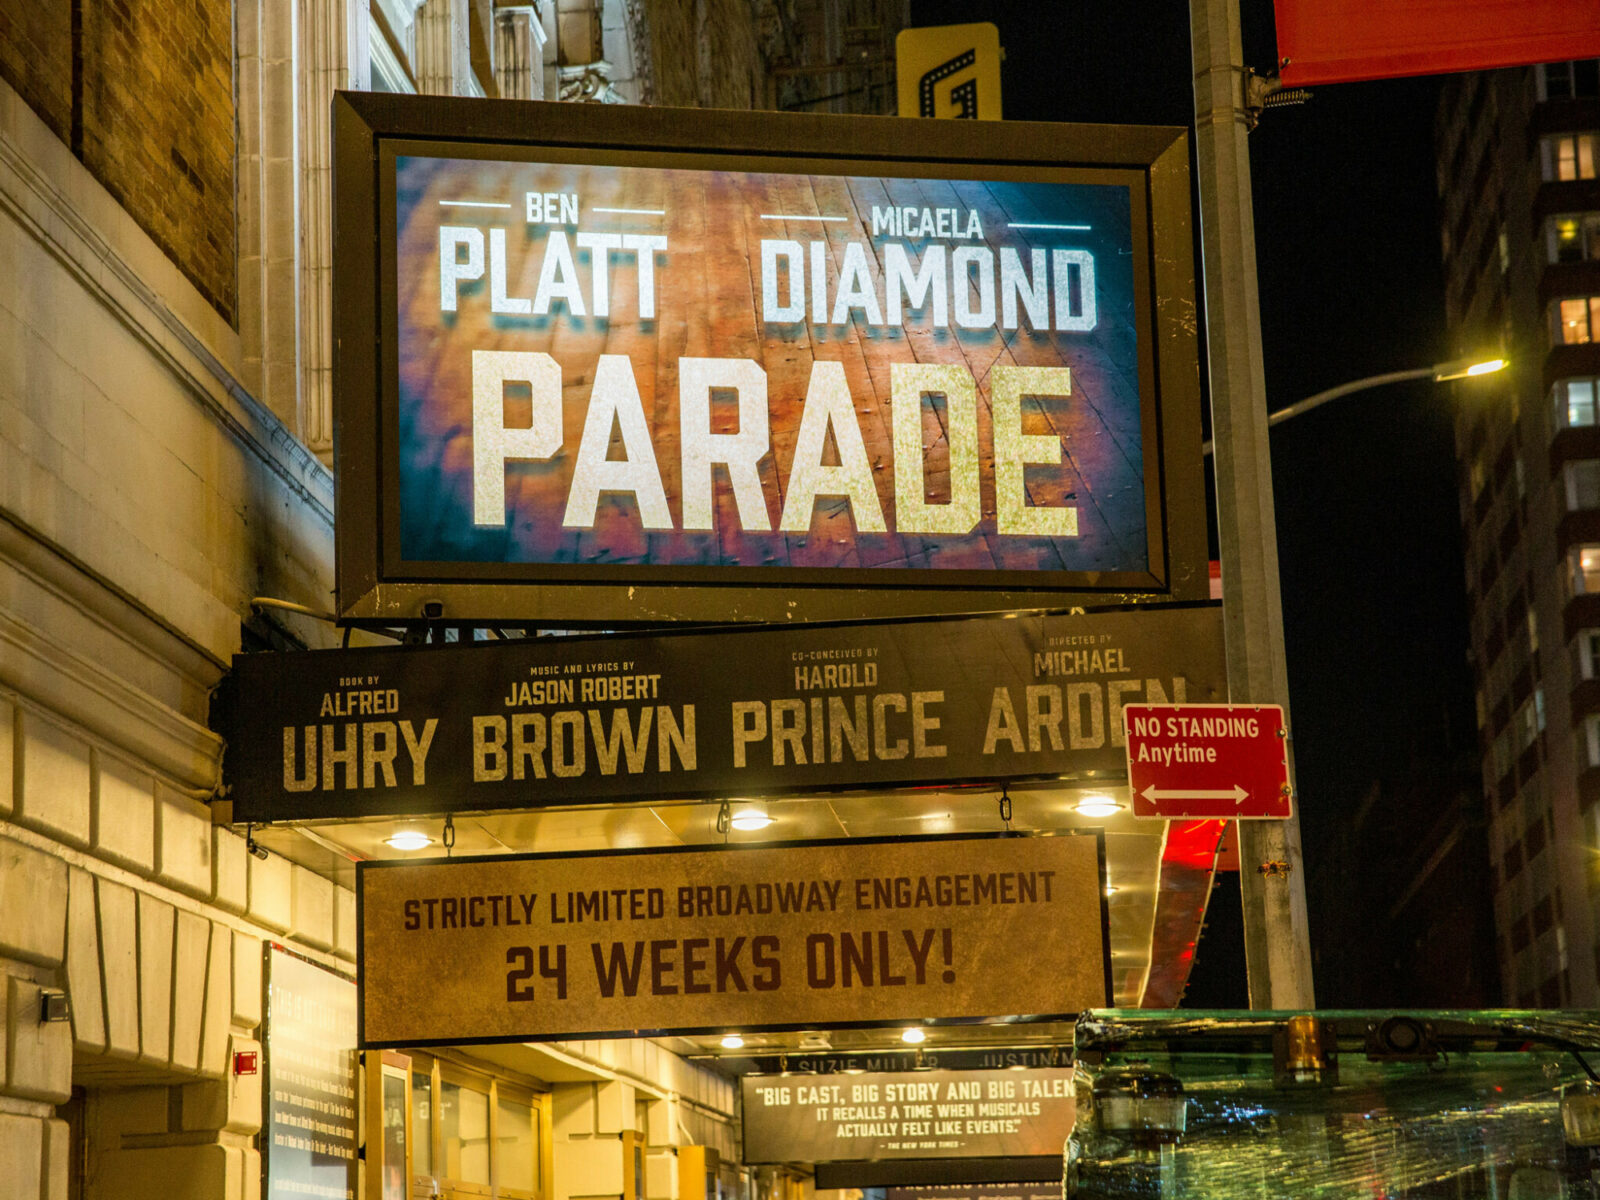 Parade Broadway Show Tickets